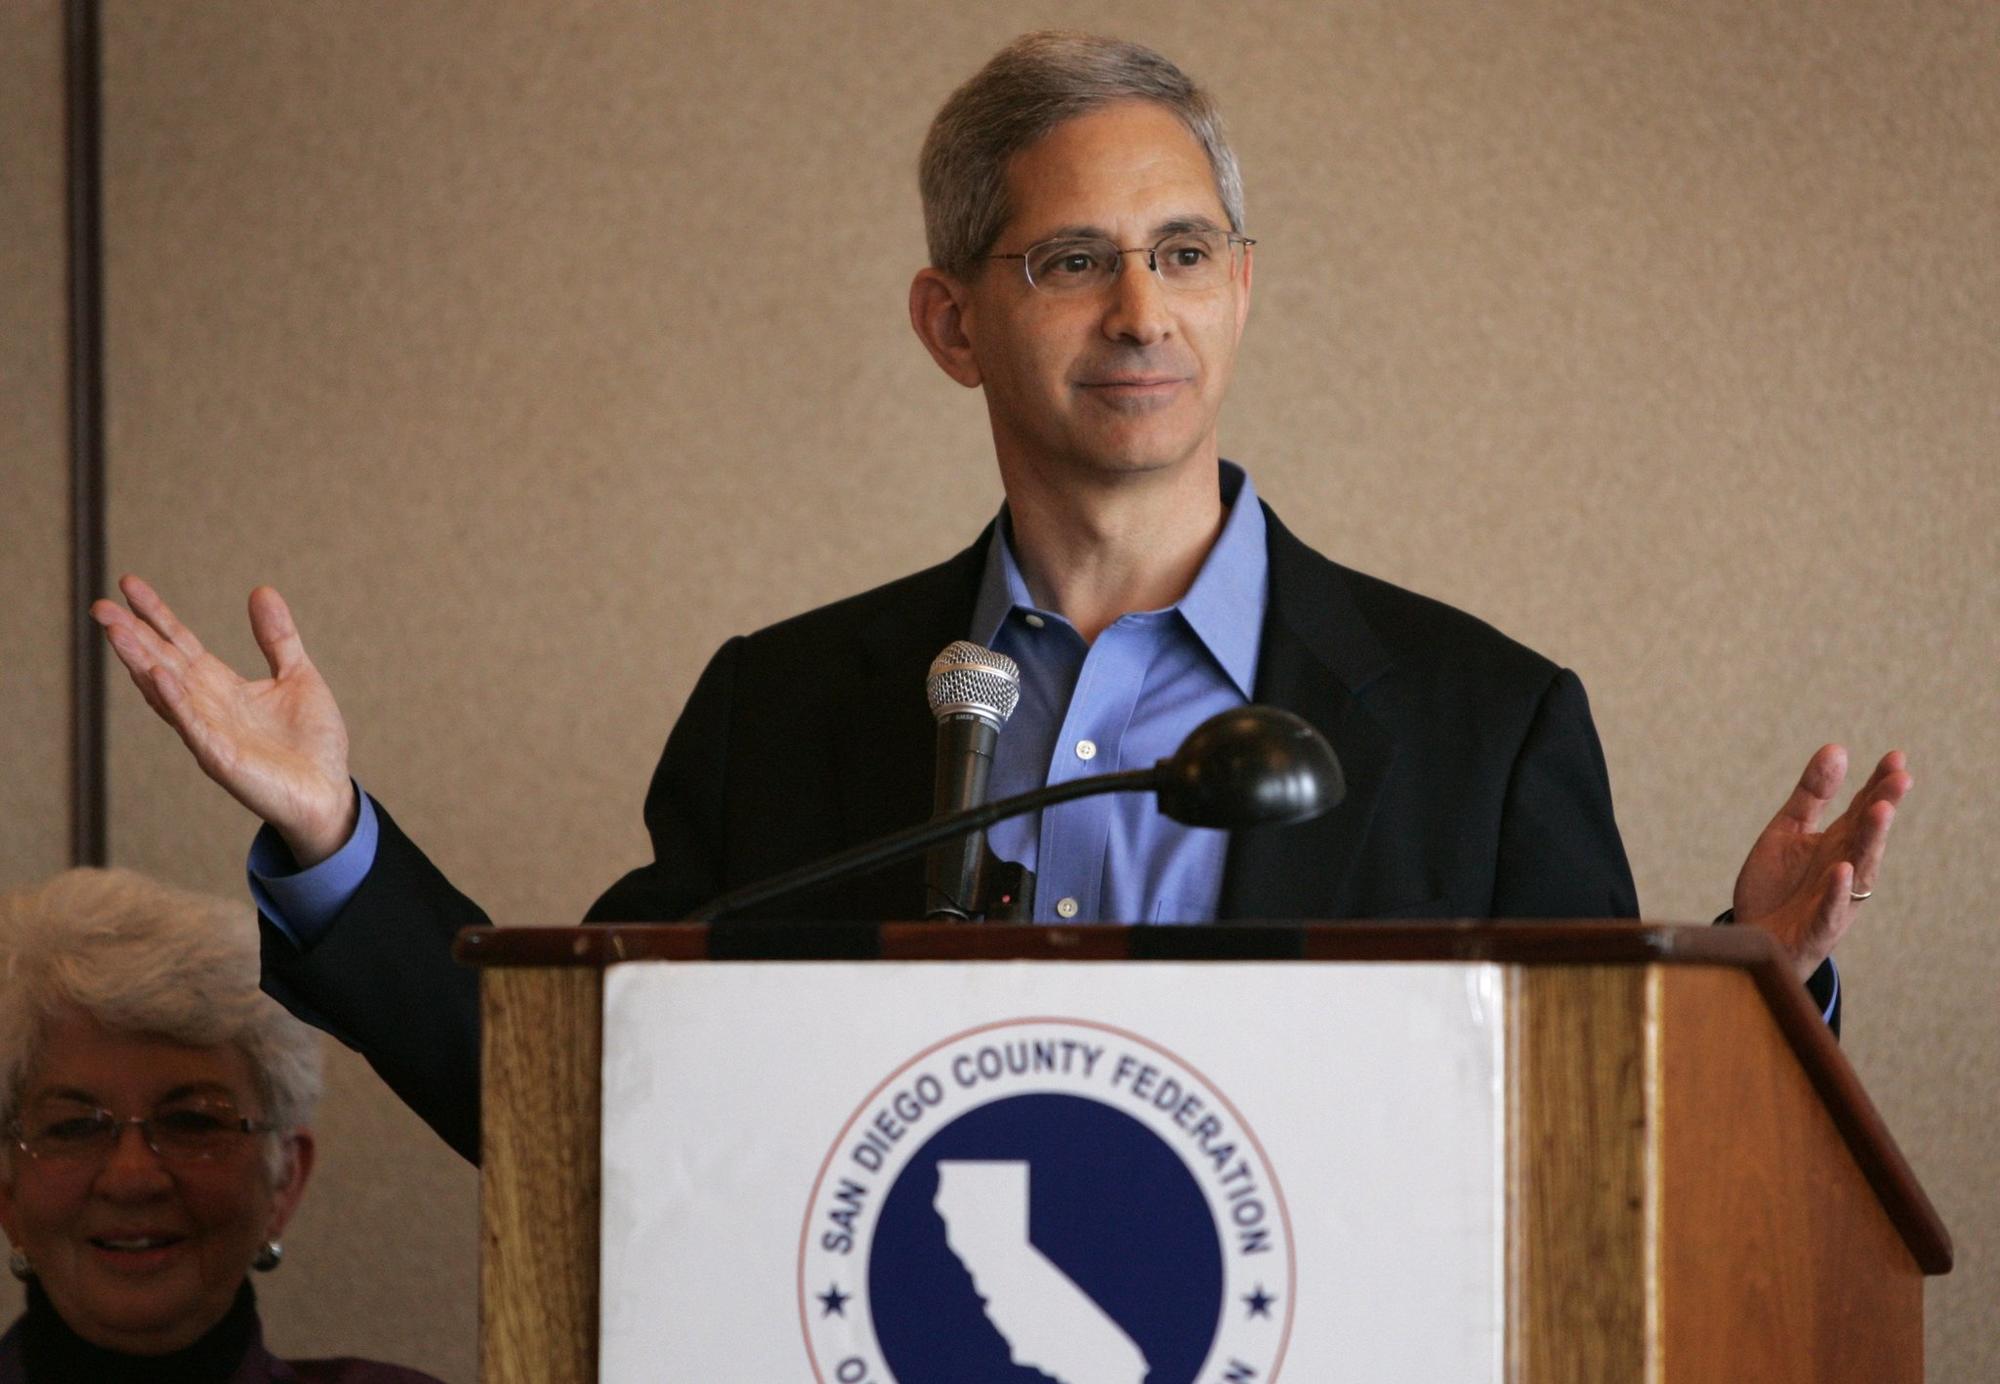 Steve Poizner, the state insurance commissioner and a candidate for governor, addressed the San Diego County Federation of Republican Women in Mission Beach yesterday.